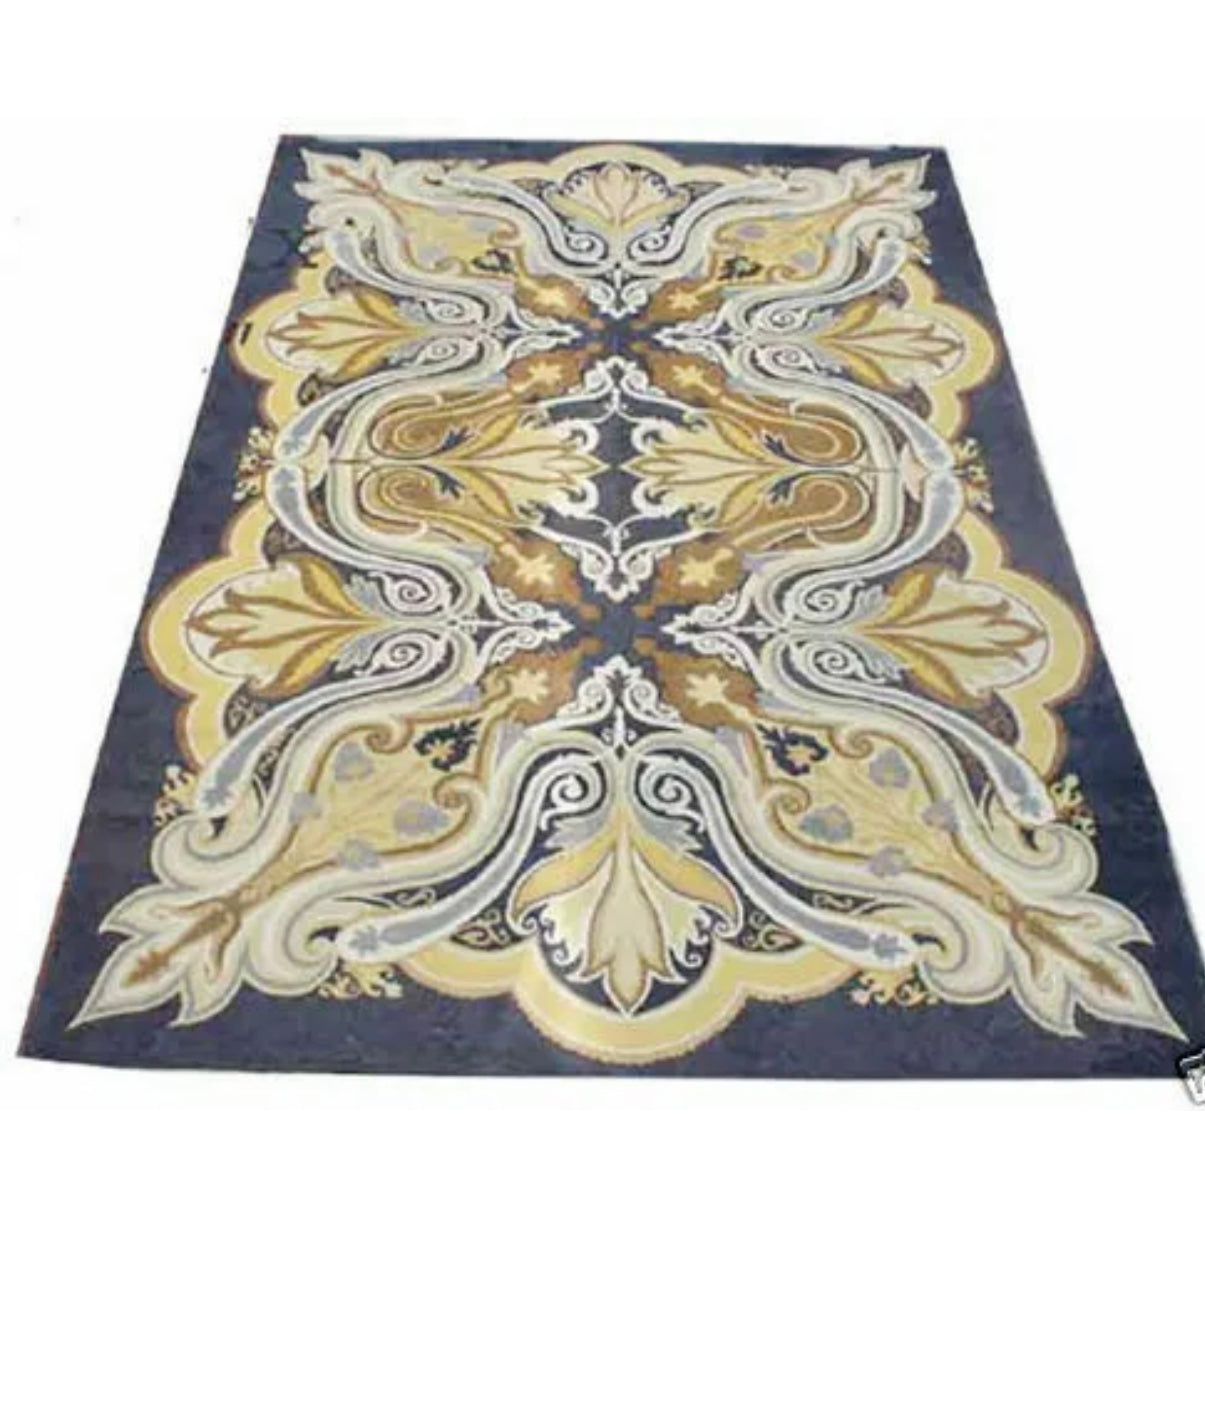 A 2nd To None Antique  Art Nouveau/ Art Deco American Hooked Rug